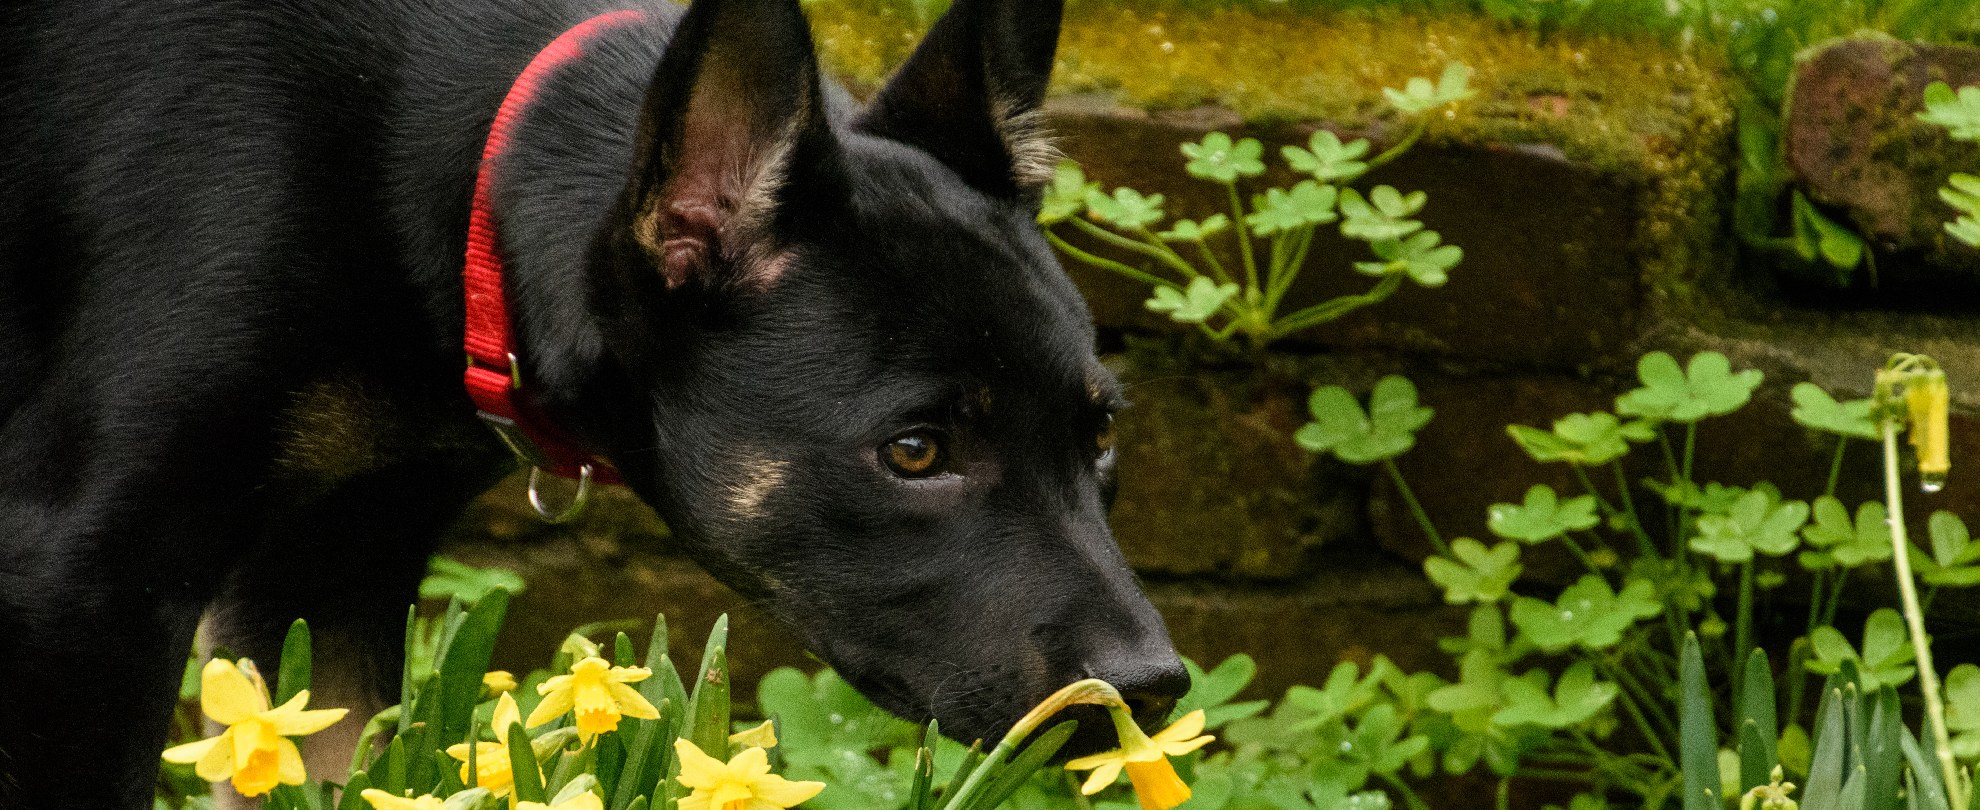 Black puppy with red collar smelling yellow flowers